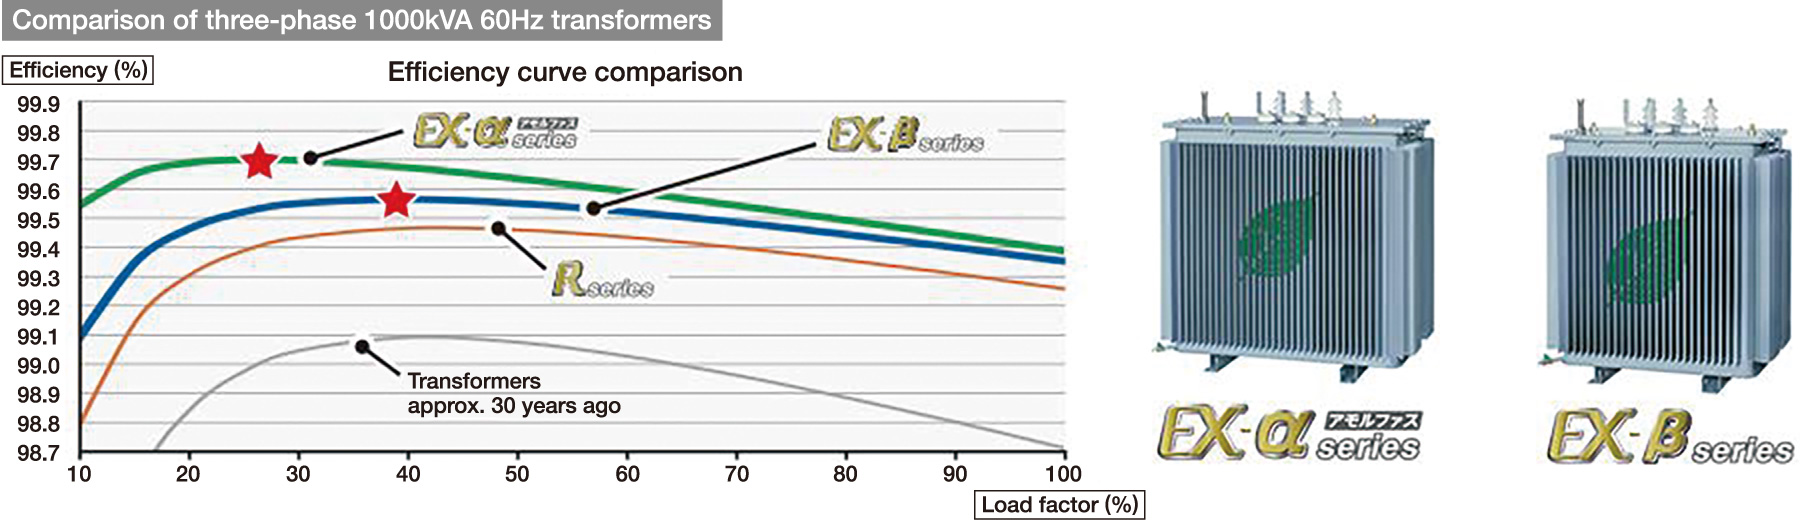 Mitsubishi Electric’s super high efficiency oil-immersed transformers achieve energy saving criteria of approximately 150% for the EX-α series and 120% for the EX-β series. Each model has a different maximum efficiency point (marked ★ above), allowing customers to select the optimum transformer for their installation environment and operating conditions.